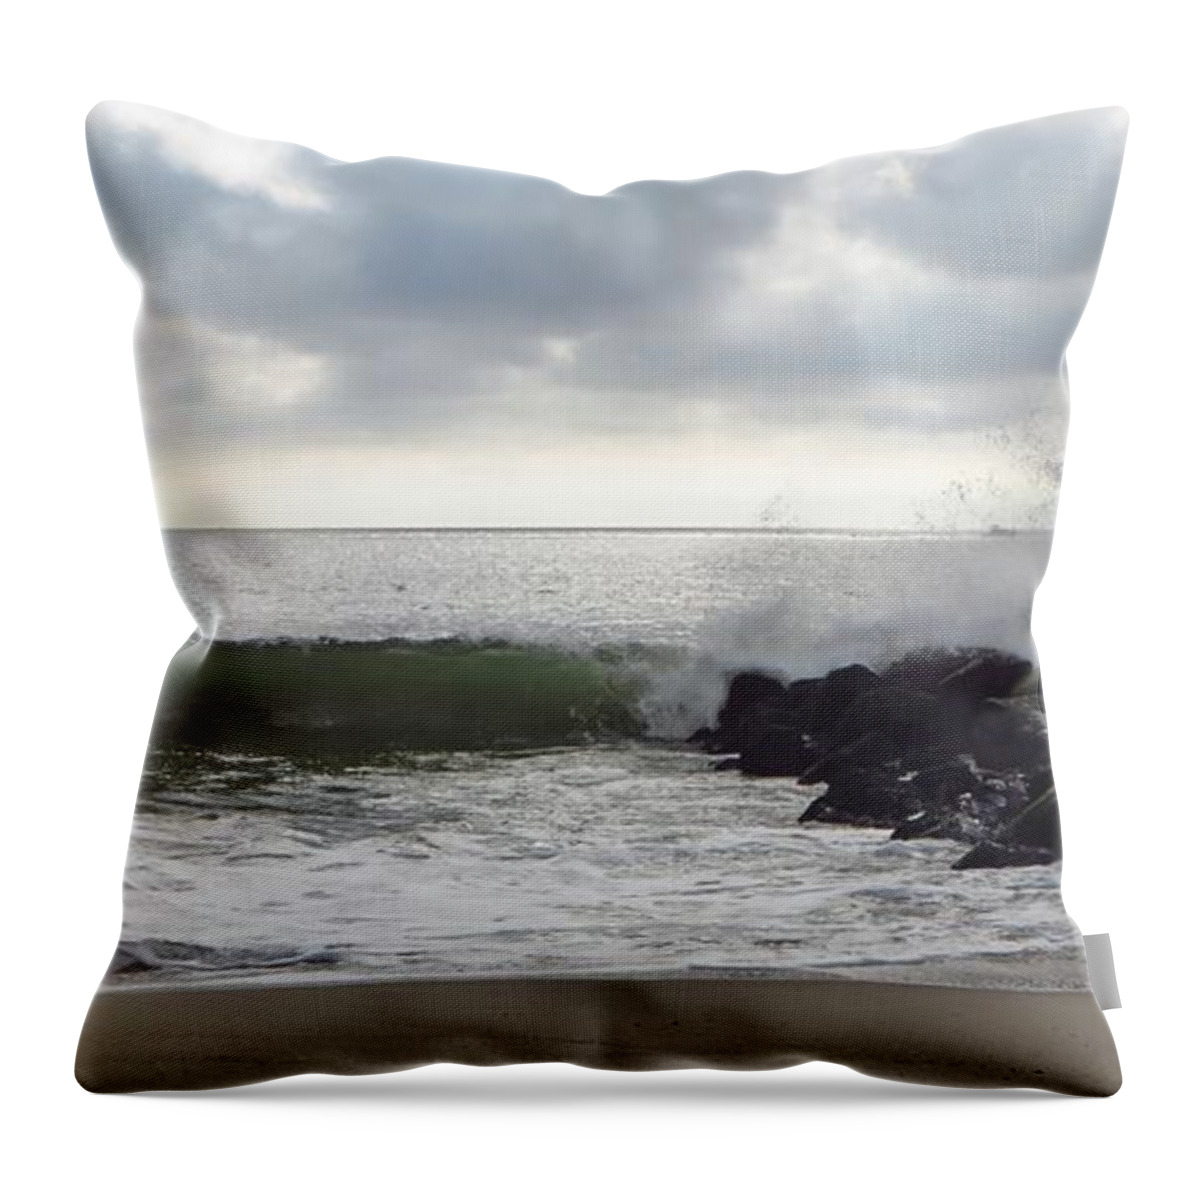 Beach Wave Throw Pillow featuring the photograph Breaker And Wave by Michael Ramsey